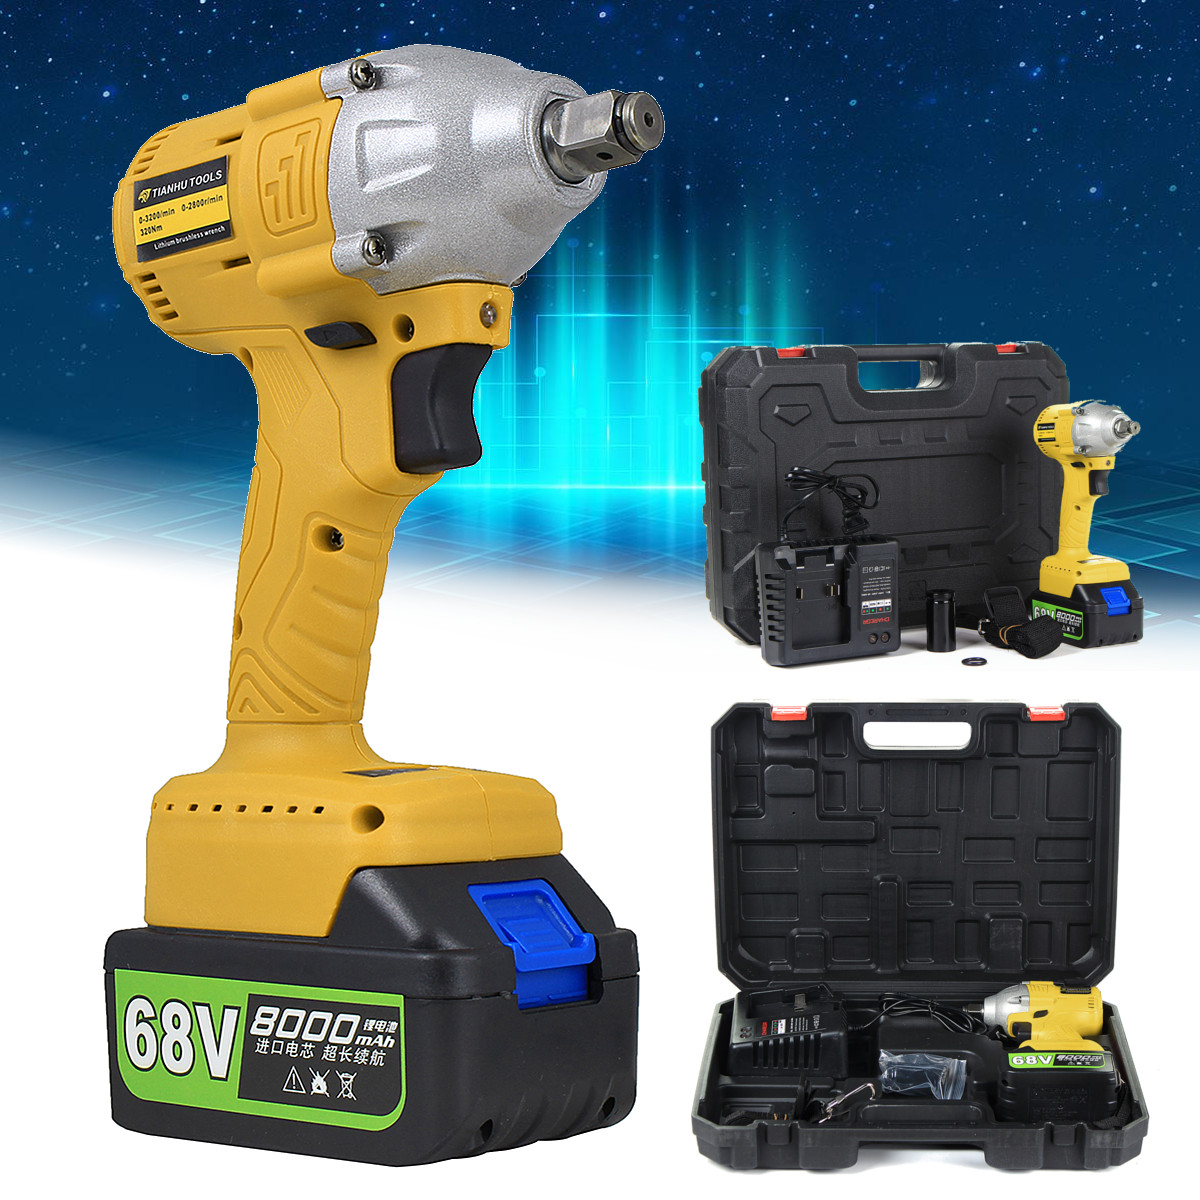 8000mAh-68V-Lithium-Ion-Brushless-Cordless-High-Torque-Square-Drive-Impact-Wrench-1262426-1